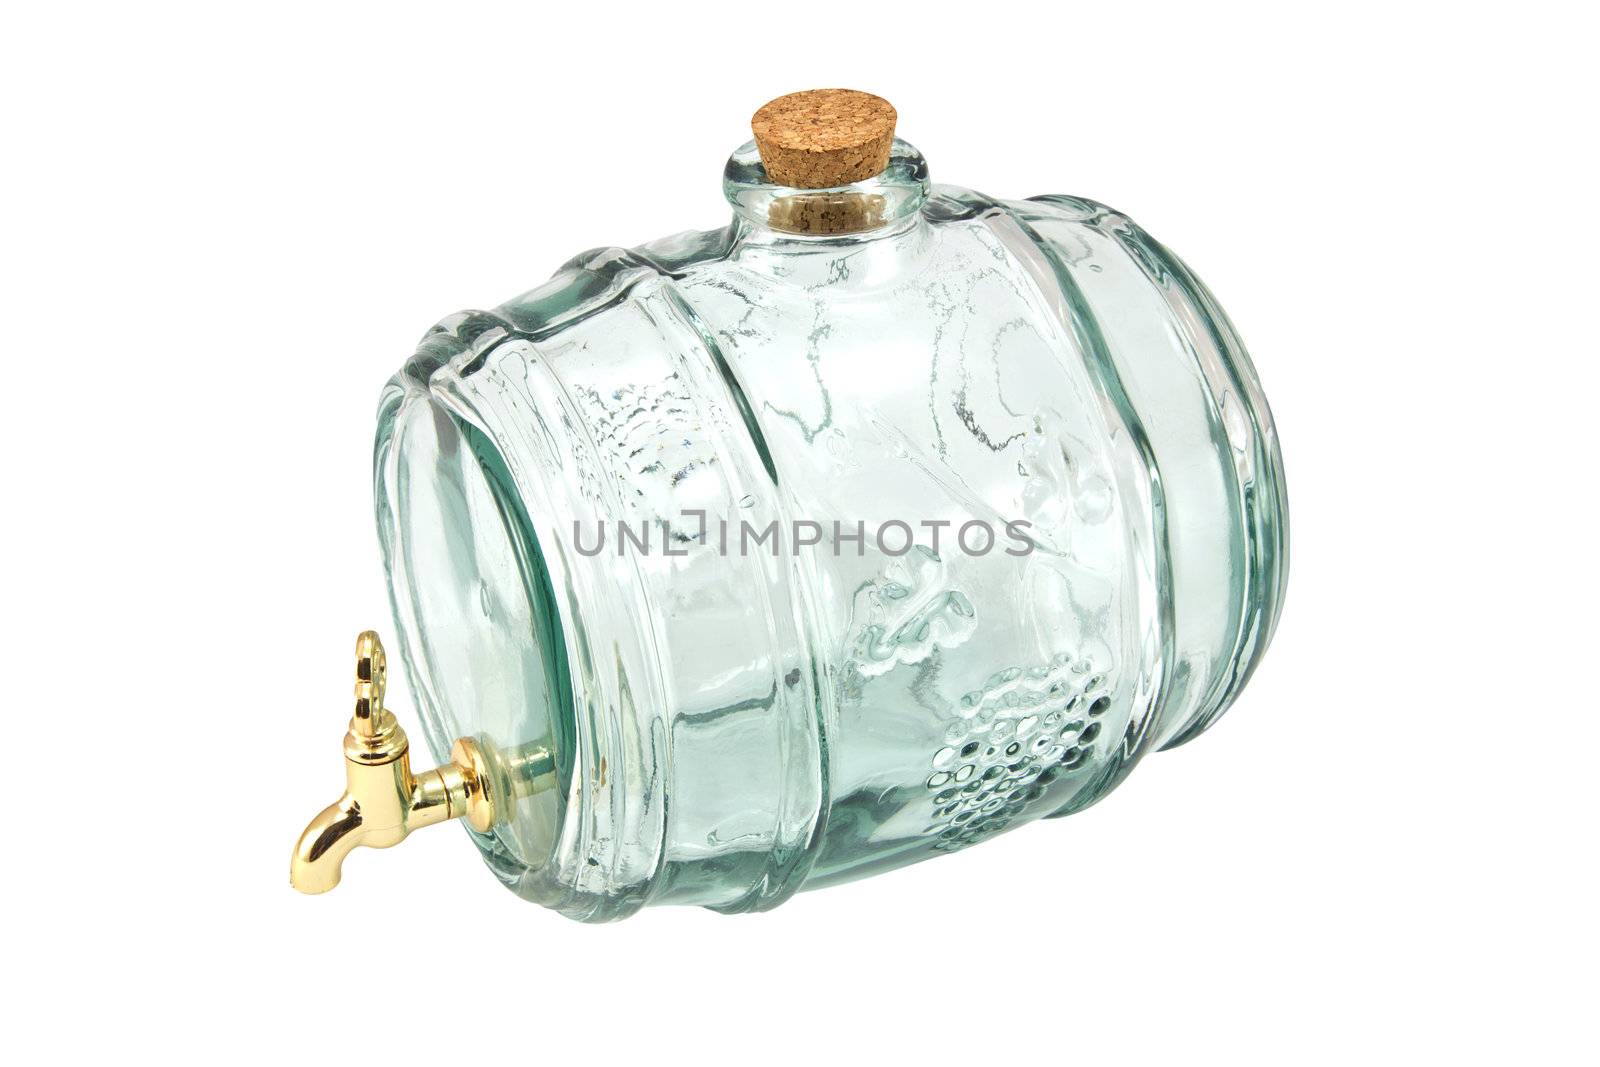 A barrel-shaped glass decanter isolated on white